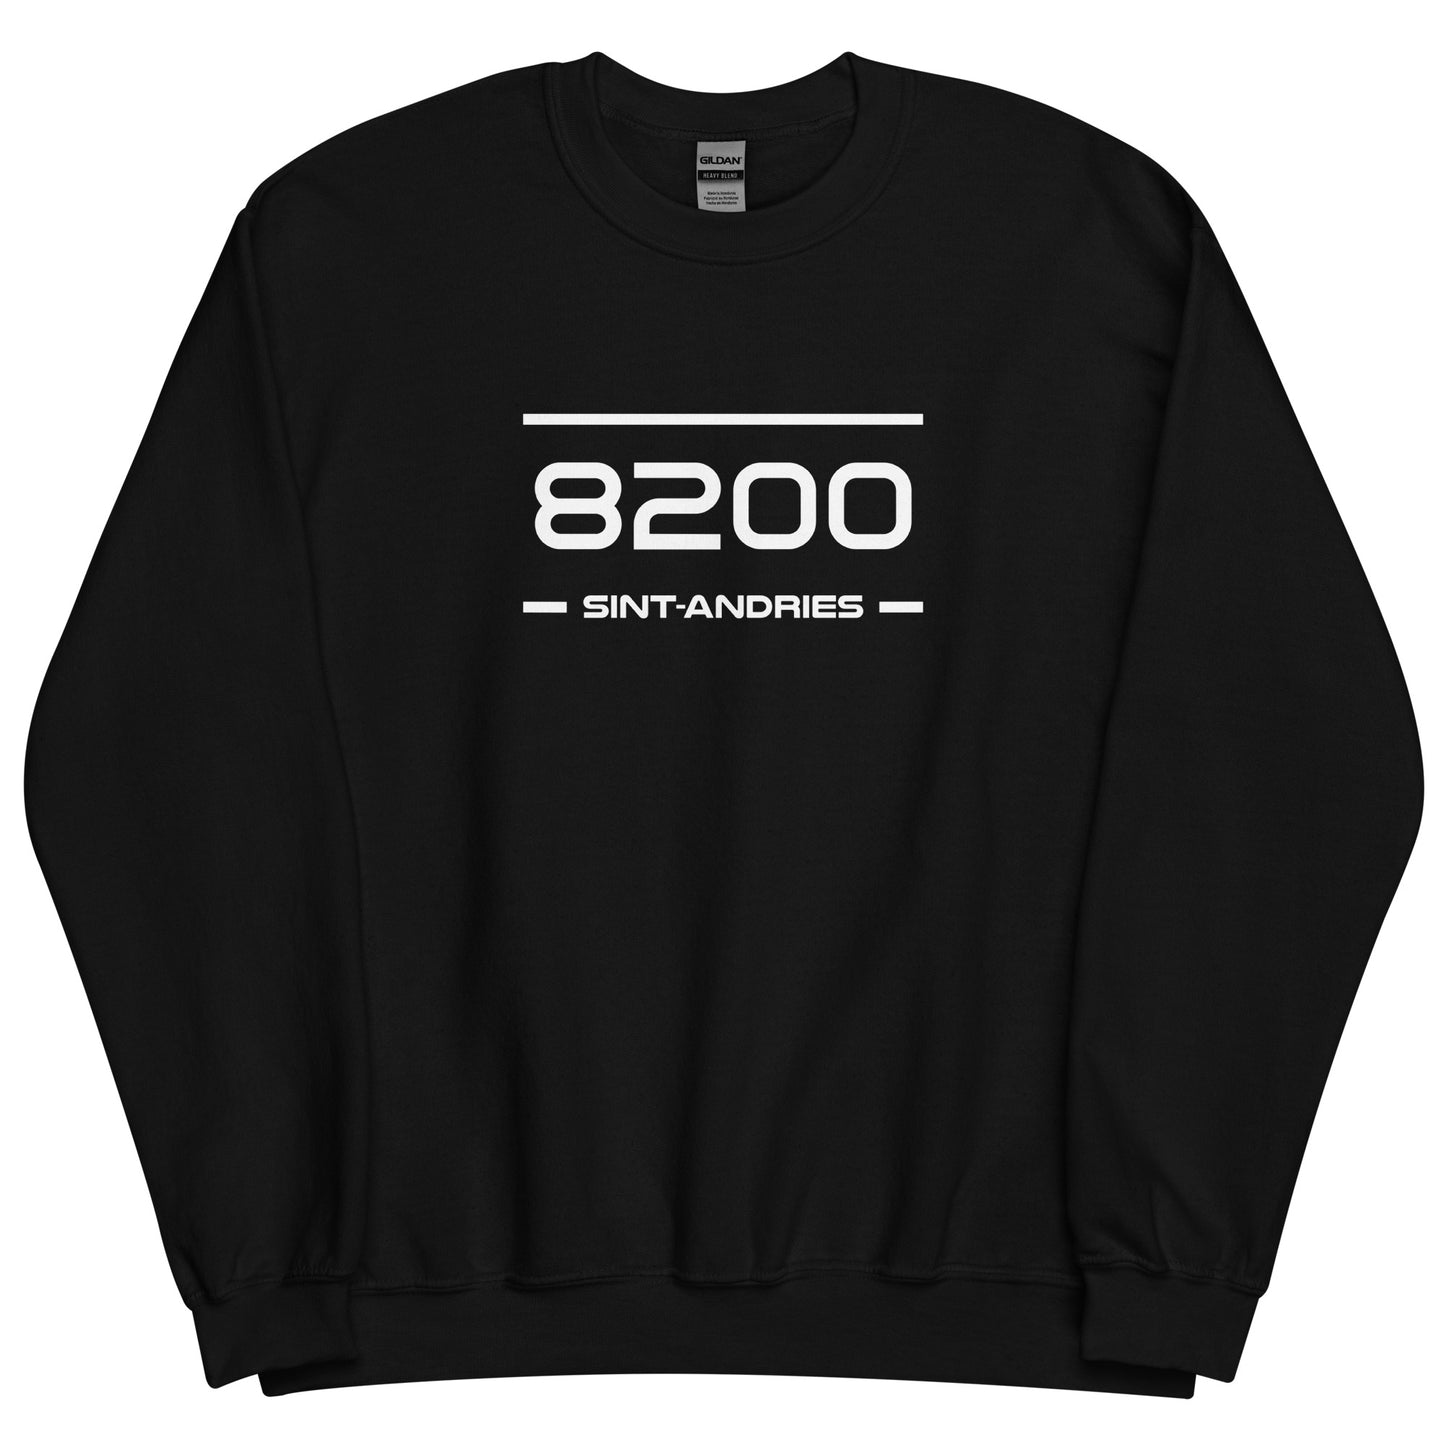 Sweater - 8200 - Sint-Andries (M/V)